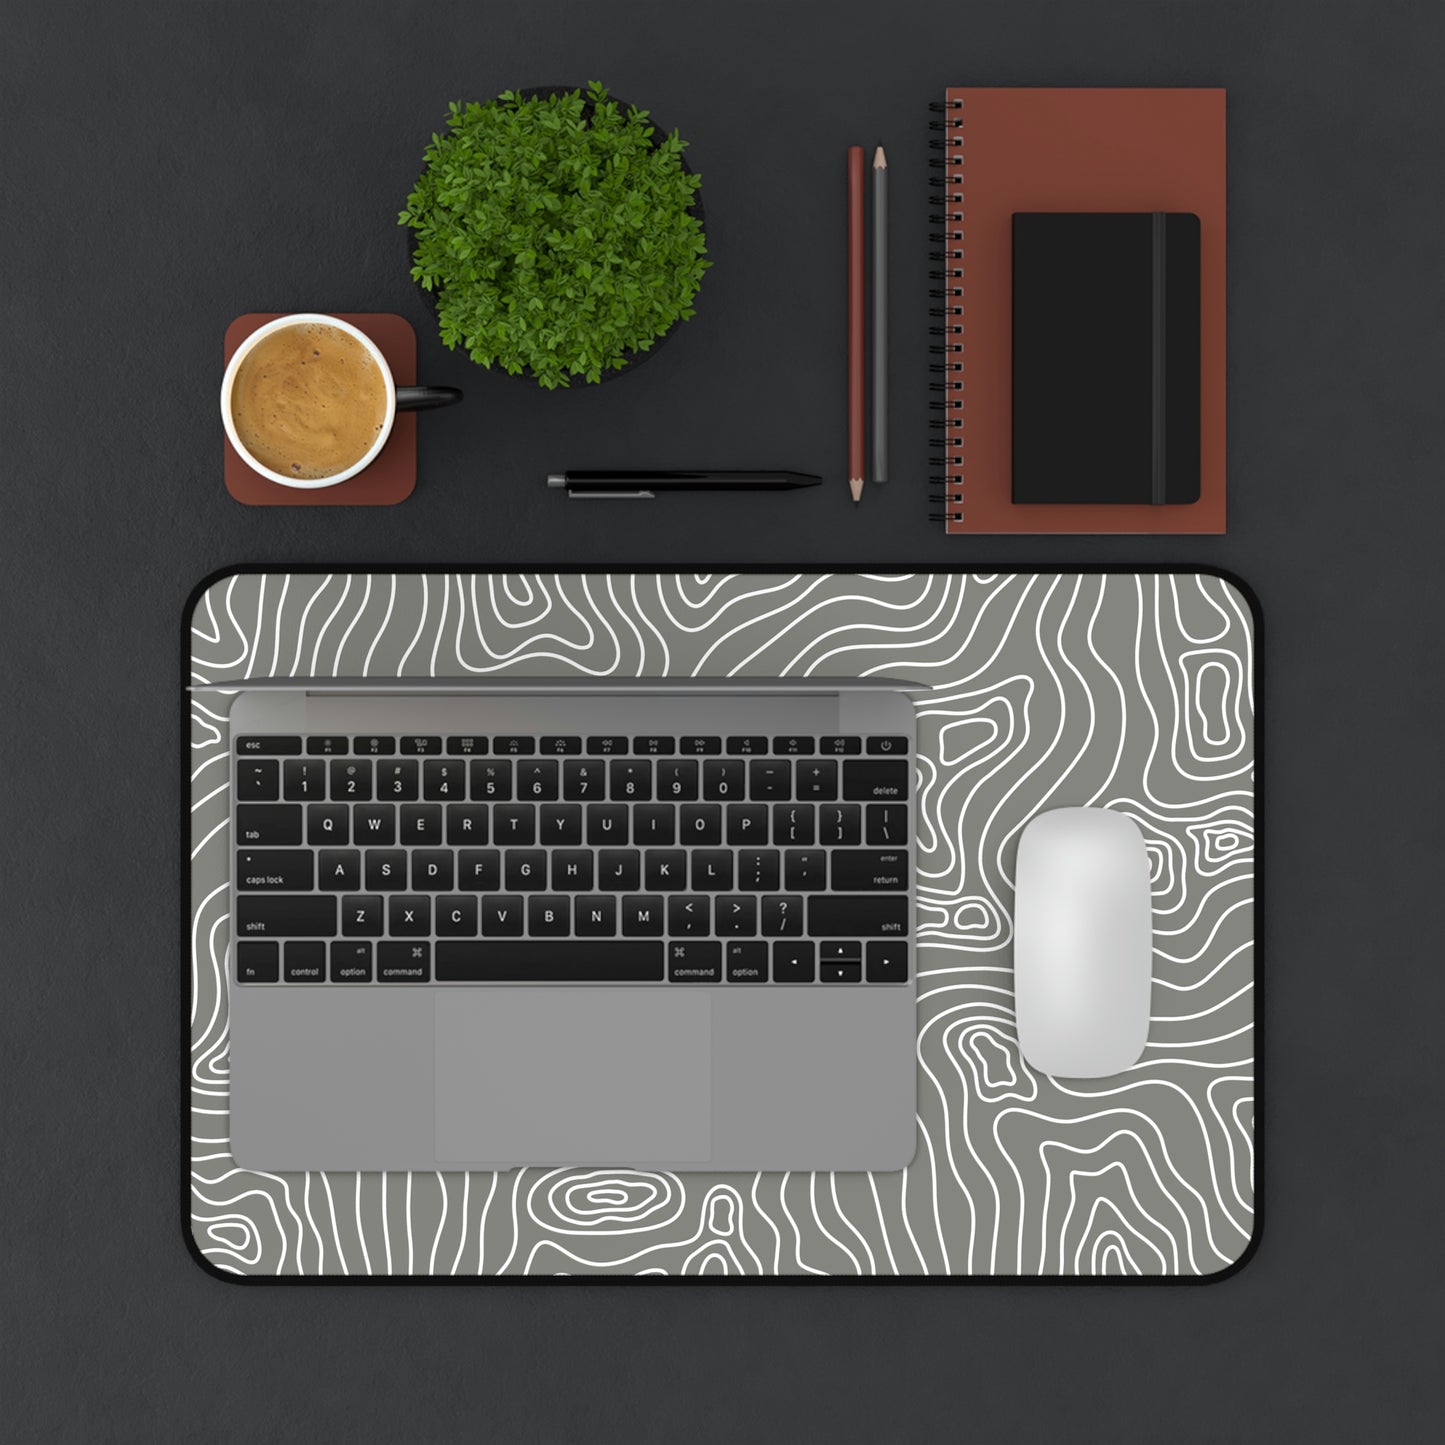 A 12" x 18" gray desk mat with white topographic lines. A laptop and mouse sit on top of it.